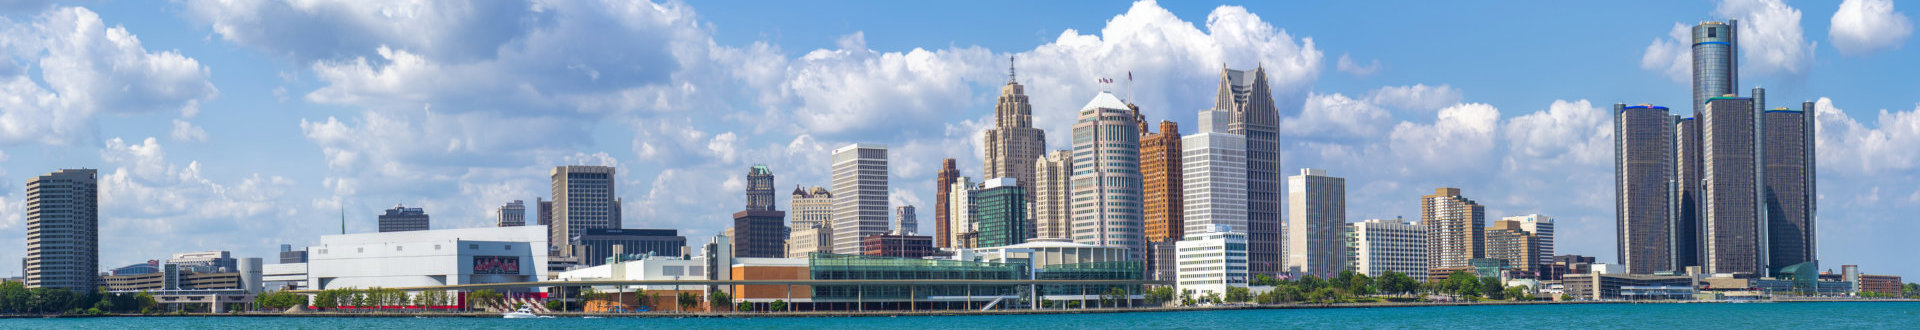 Panoramic view of Detroit skyline from Windsor, Ontario